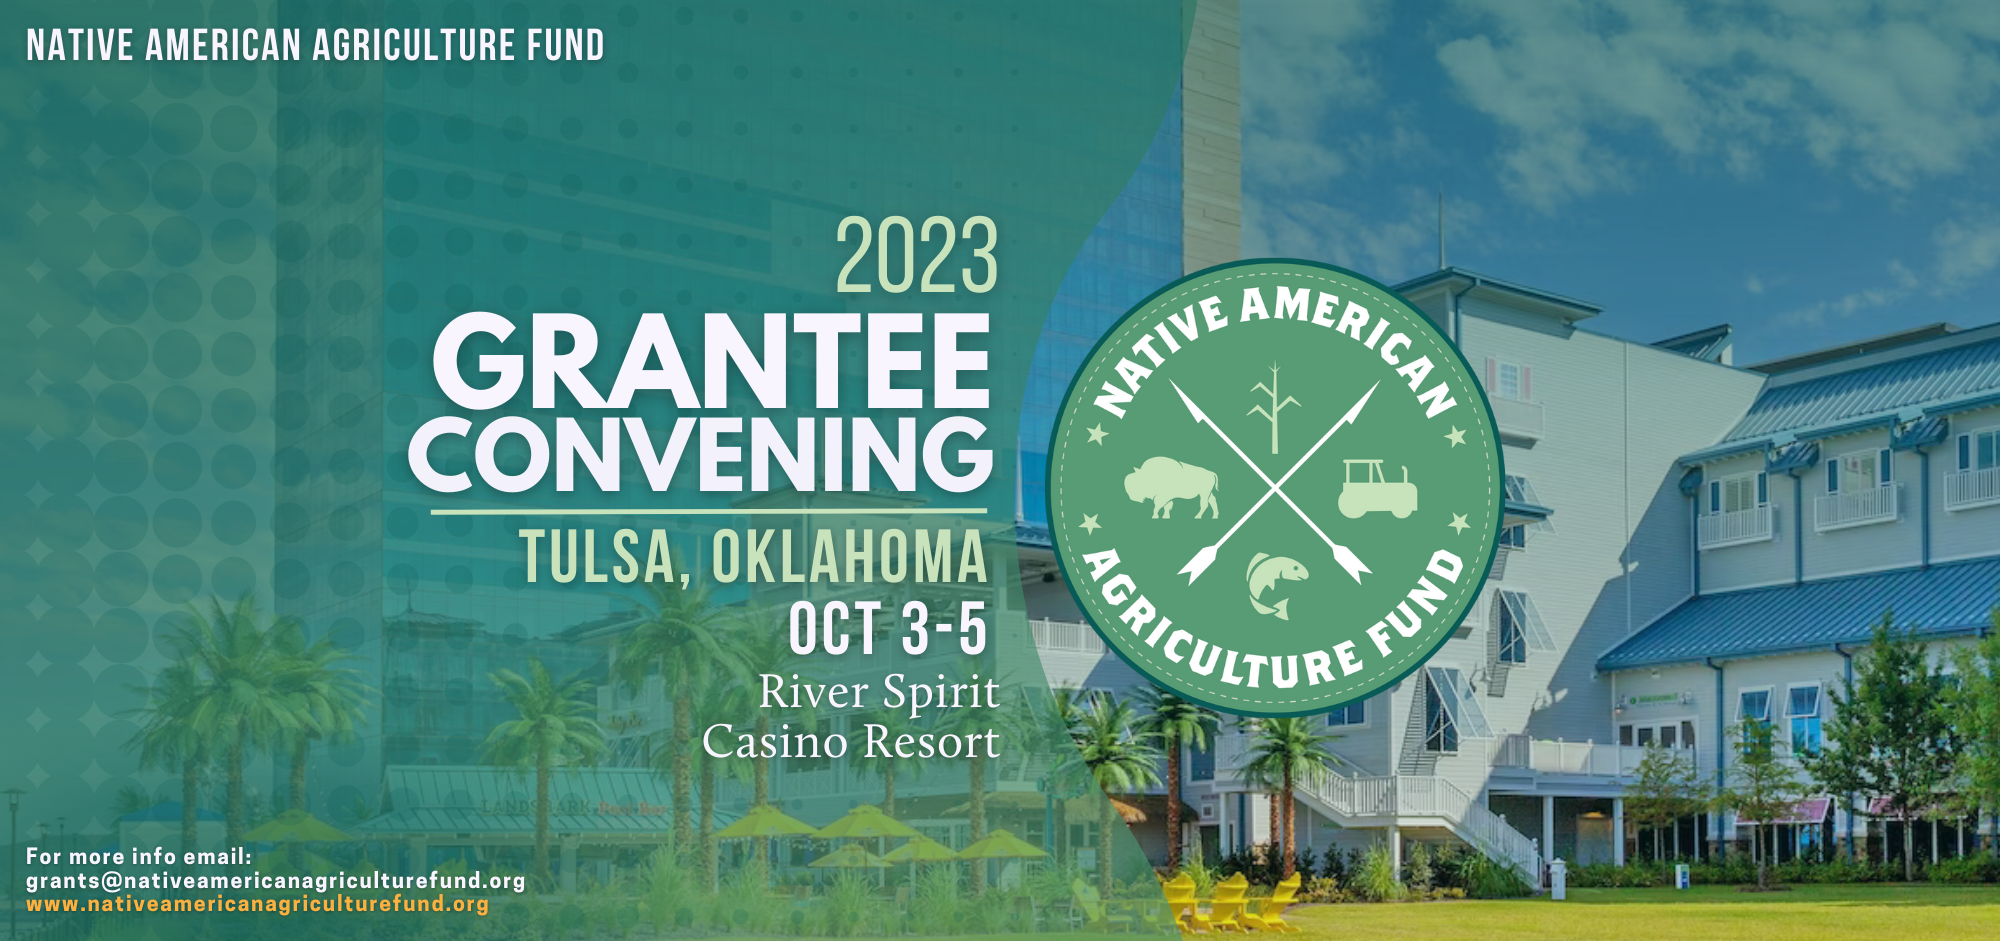 Native American Agriculture Fund 2023 Grantee Convening will occur in Tulsa, Oklahoma, October 3rd-5th. 